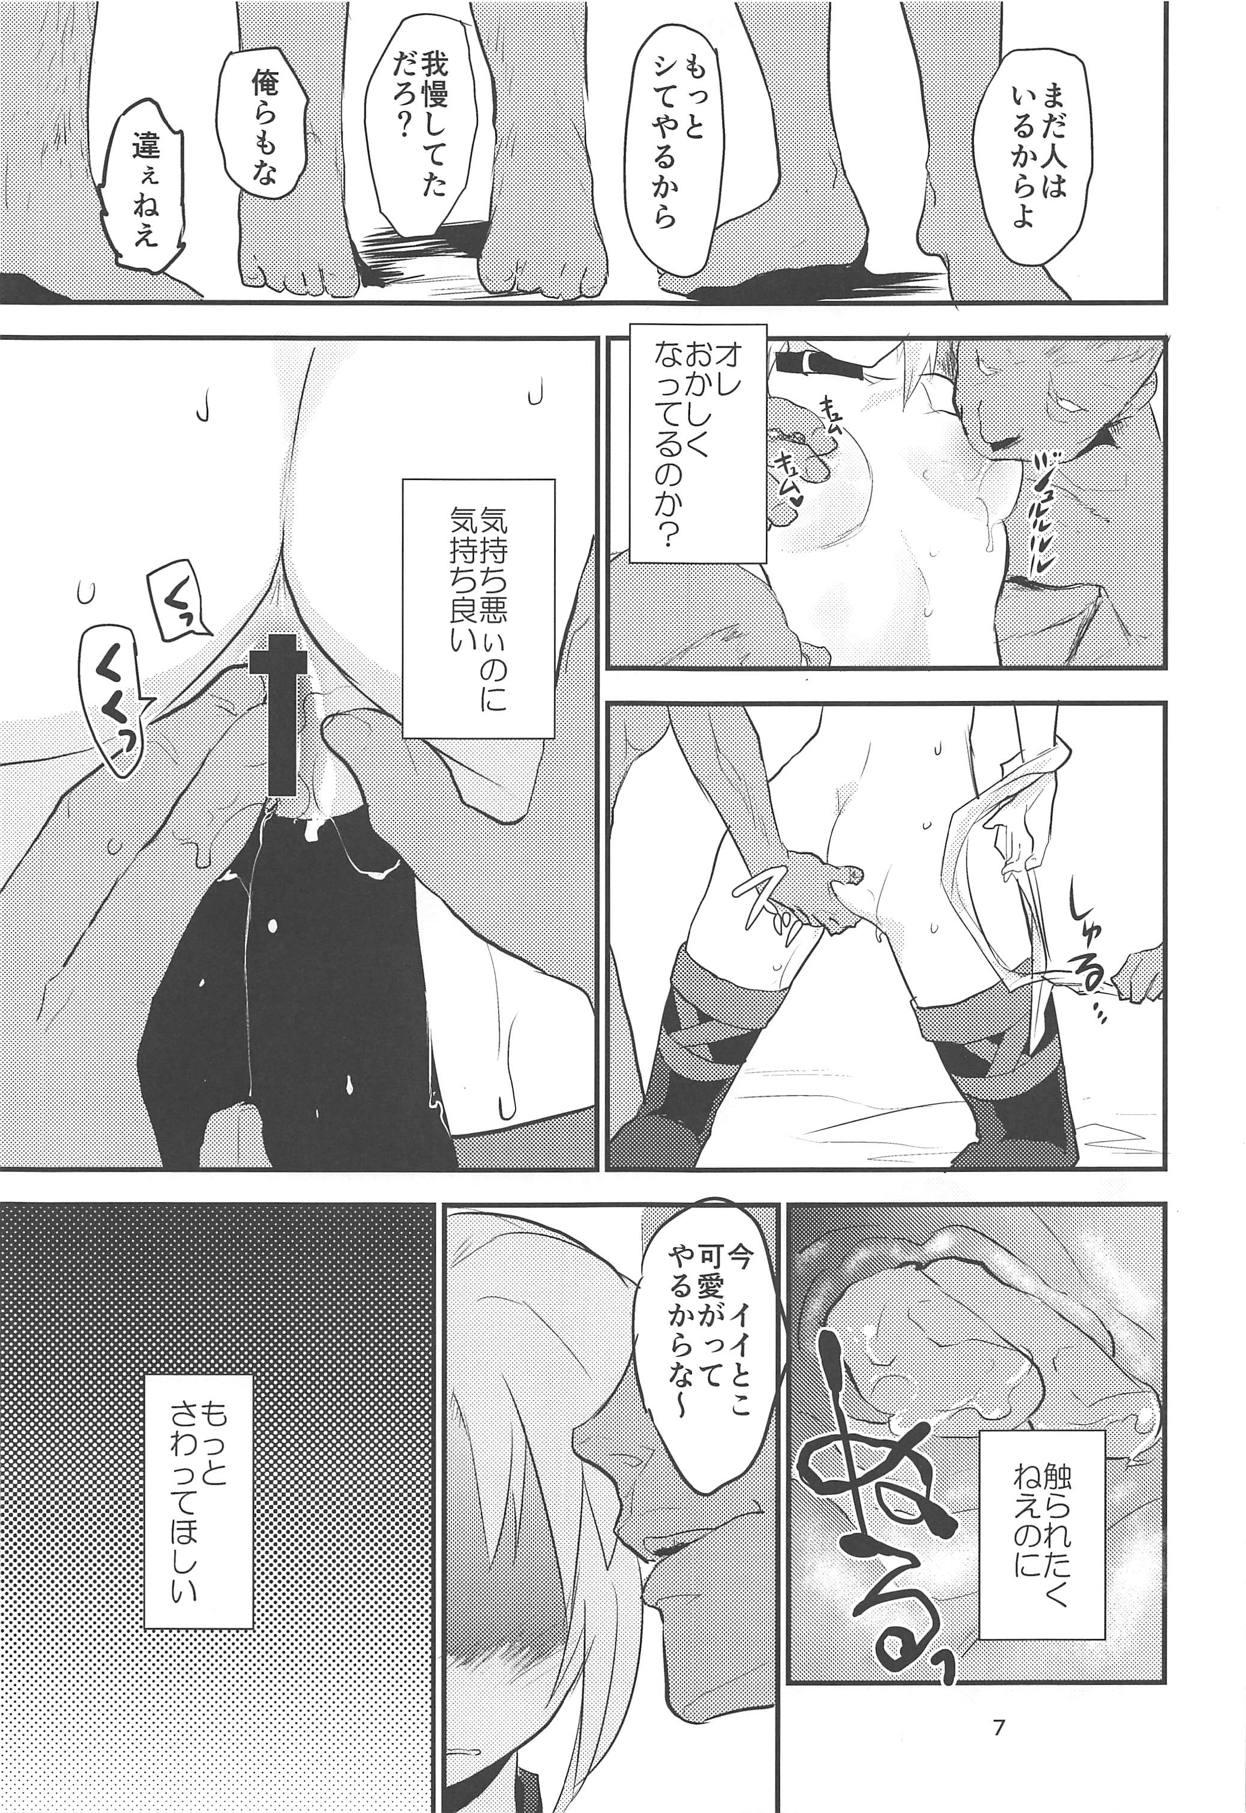 Gayporn Erotic to Knight - Fate grand order Amateurporn - Page 6